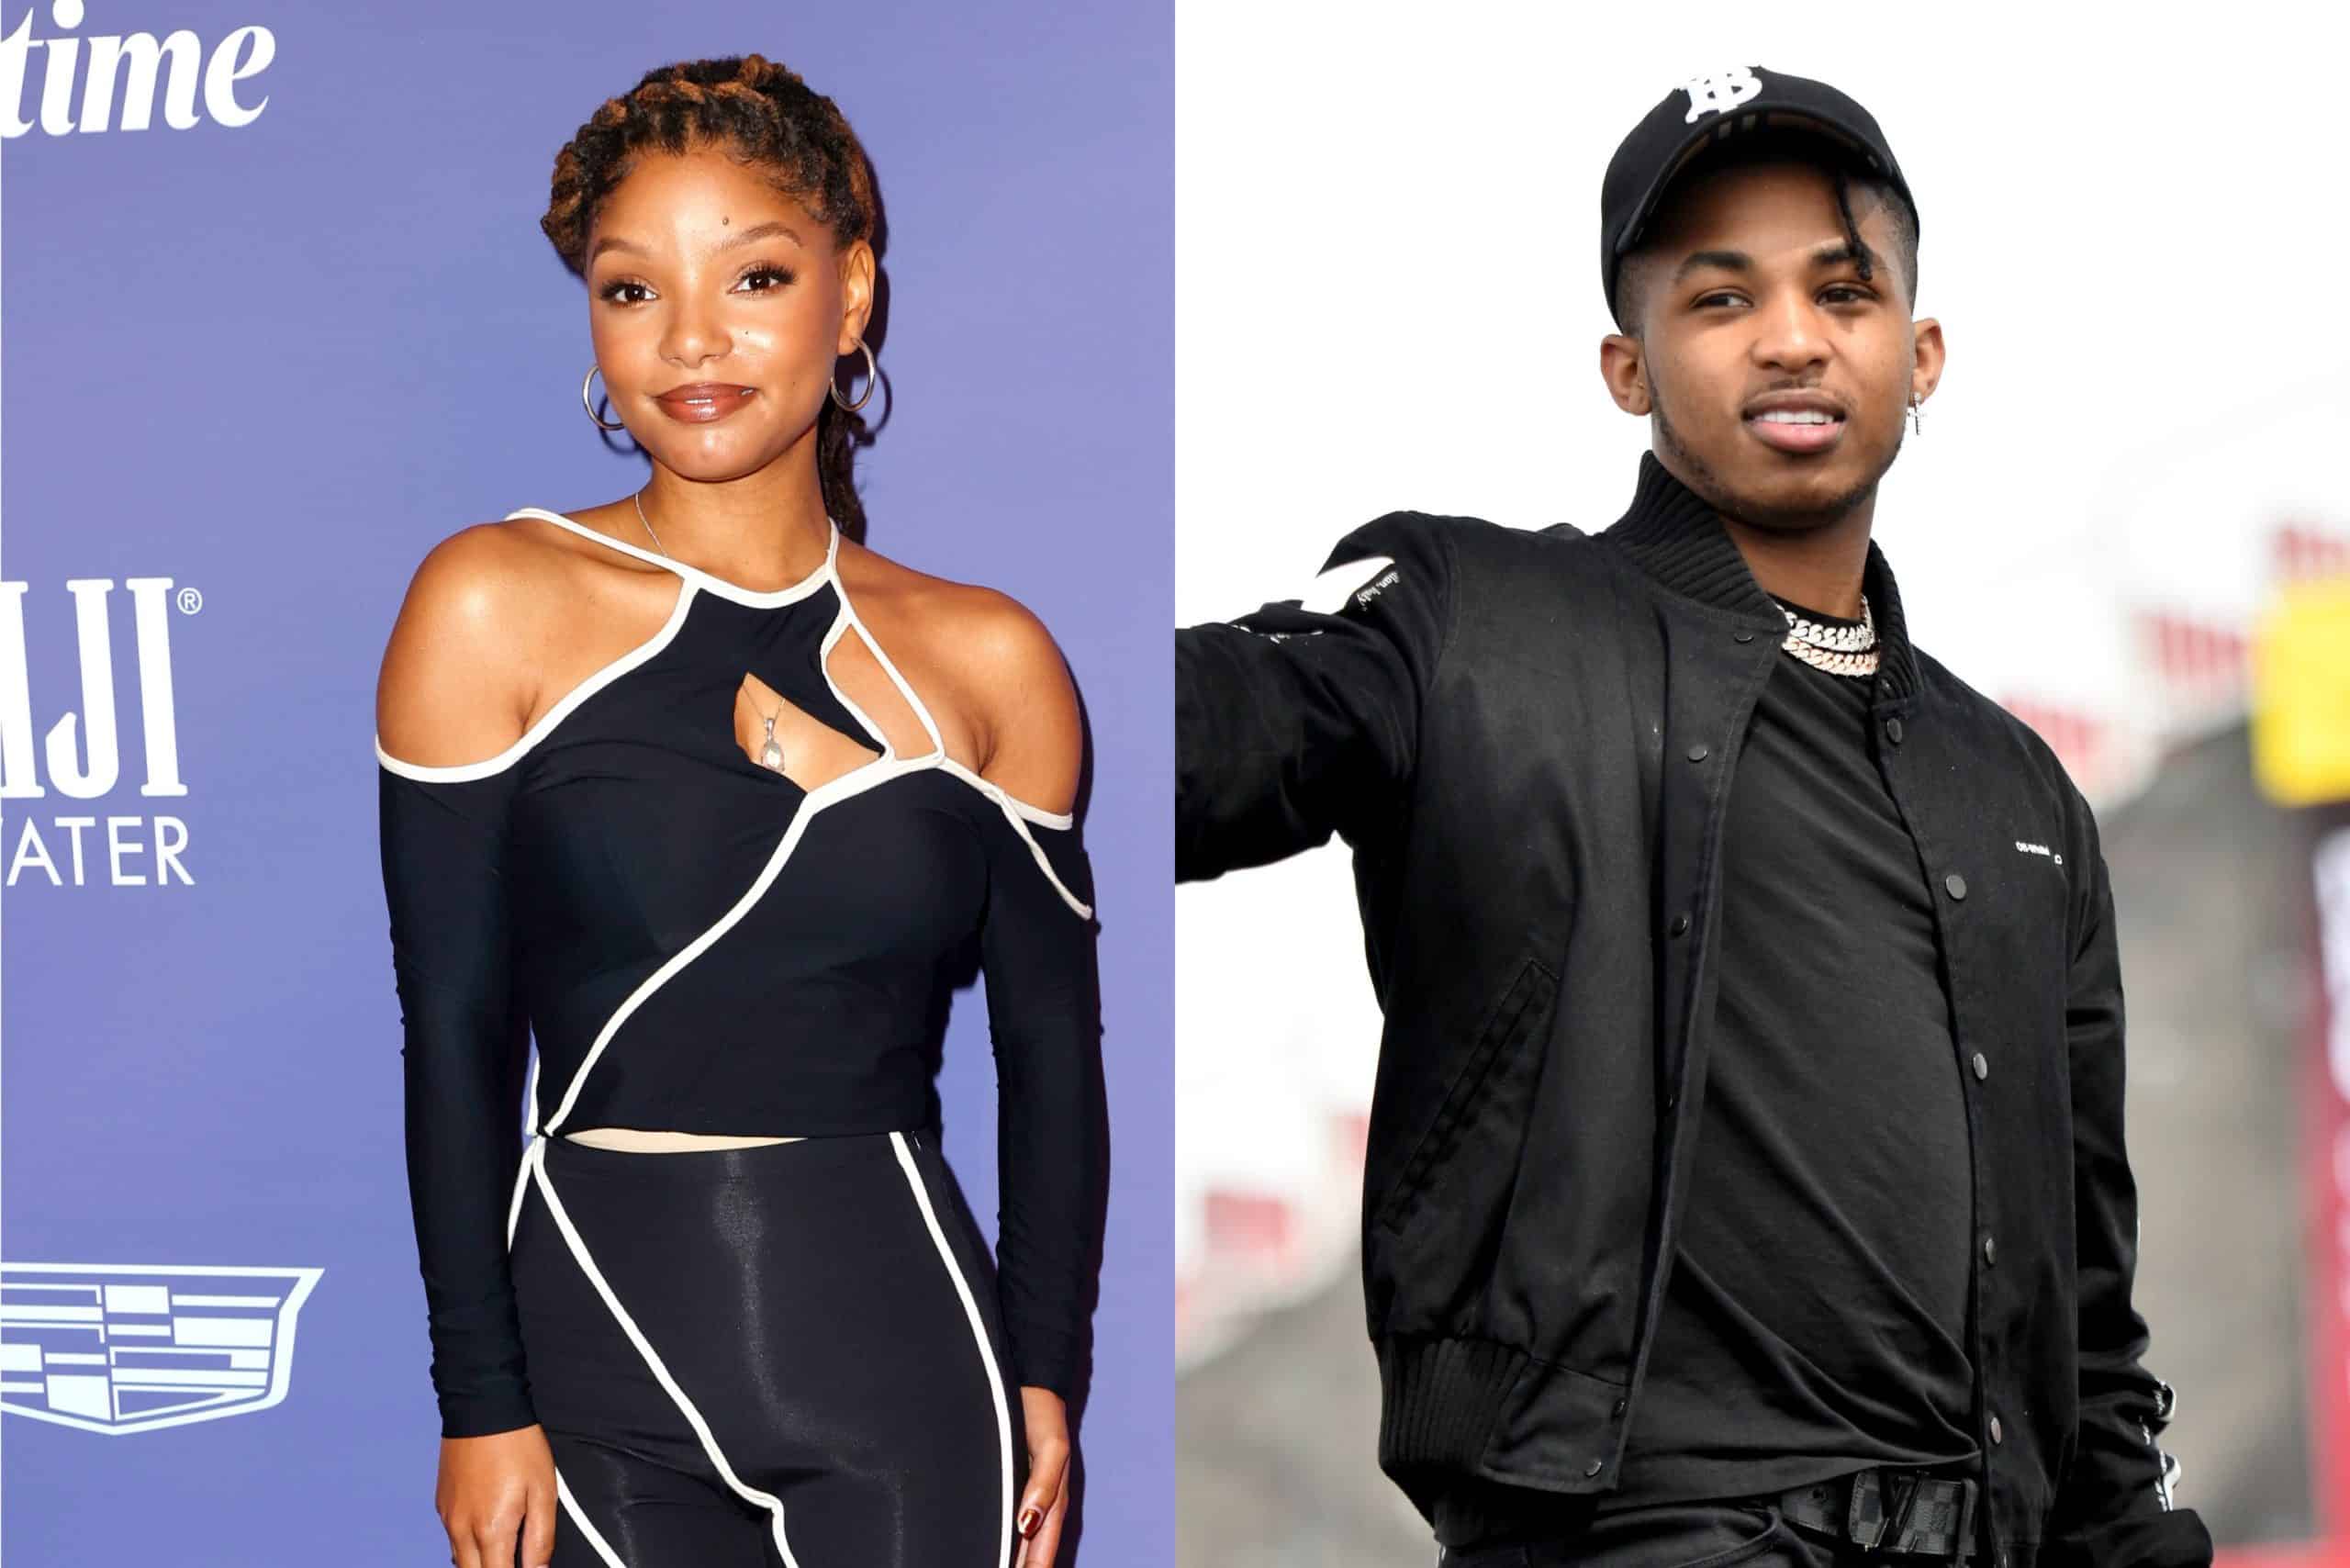 Halle Bailey And Ddg Spark Dating Rumors After Being Spotted Together At Usher Concert